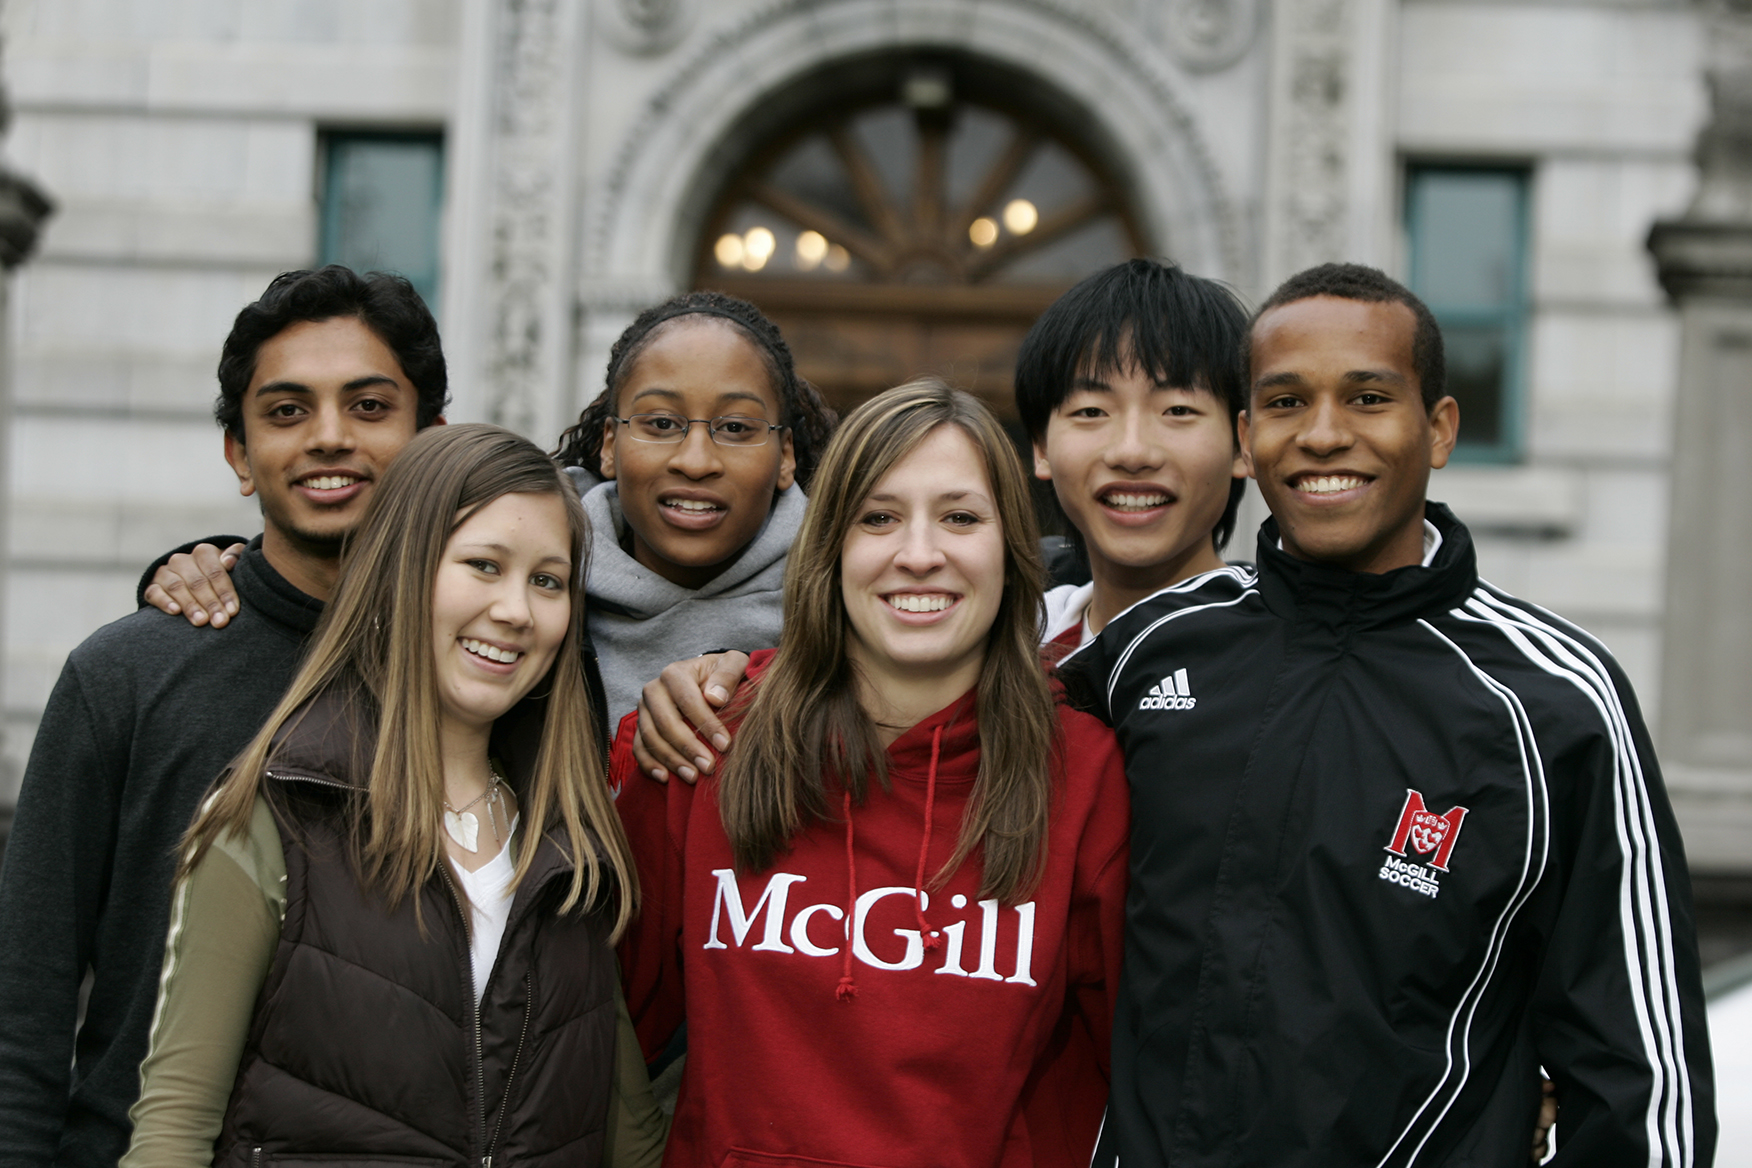 Group of young McGill students from diverse communities